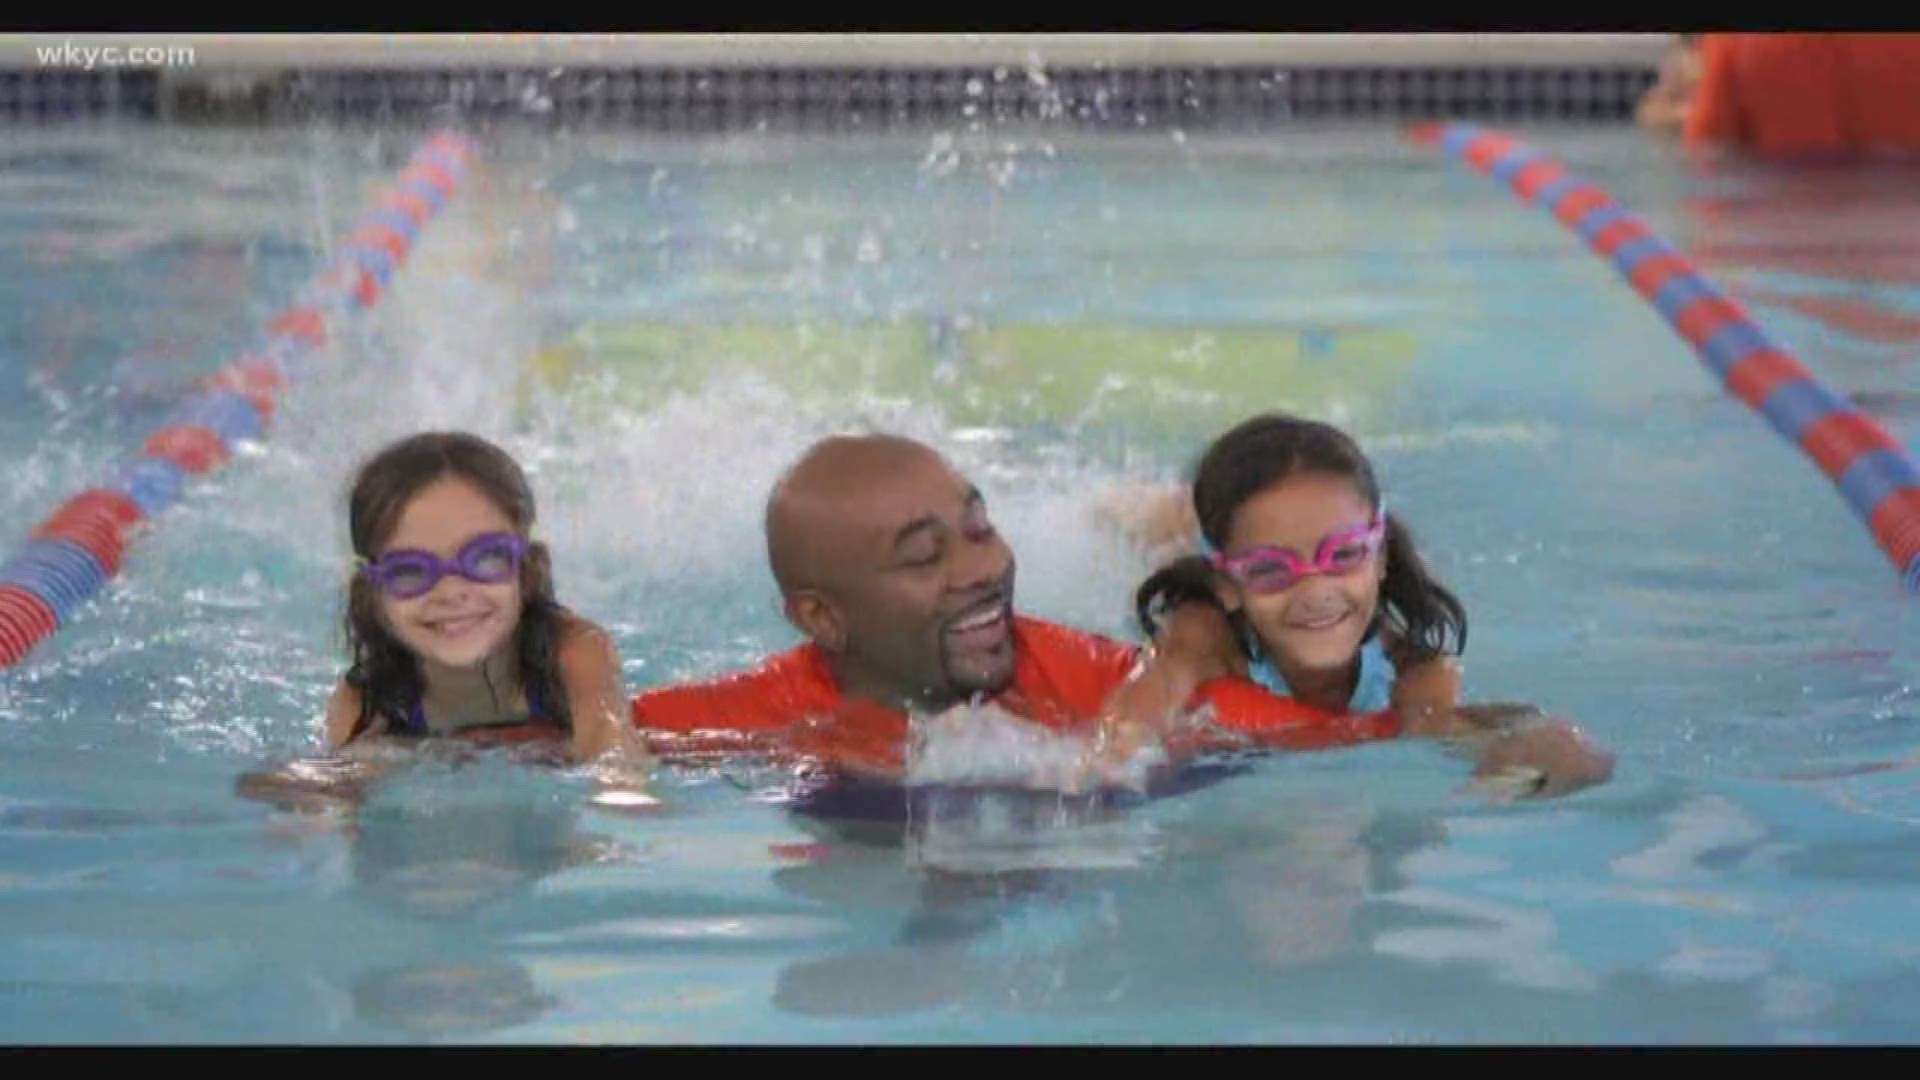 May 24, 2019: The American Academy of Pediatrics now suggests starting swimming lessons for your child at the age of 1. WKYC's Jasmine Monroe visits a Goldfish Swim School for more swimming safety advice.